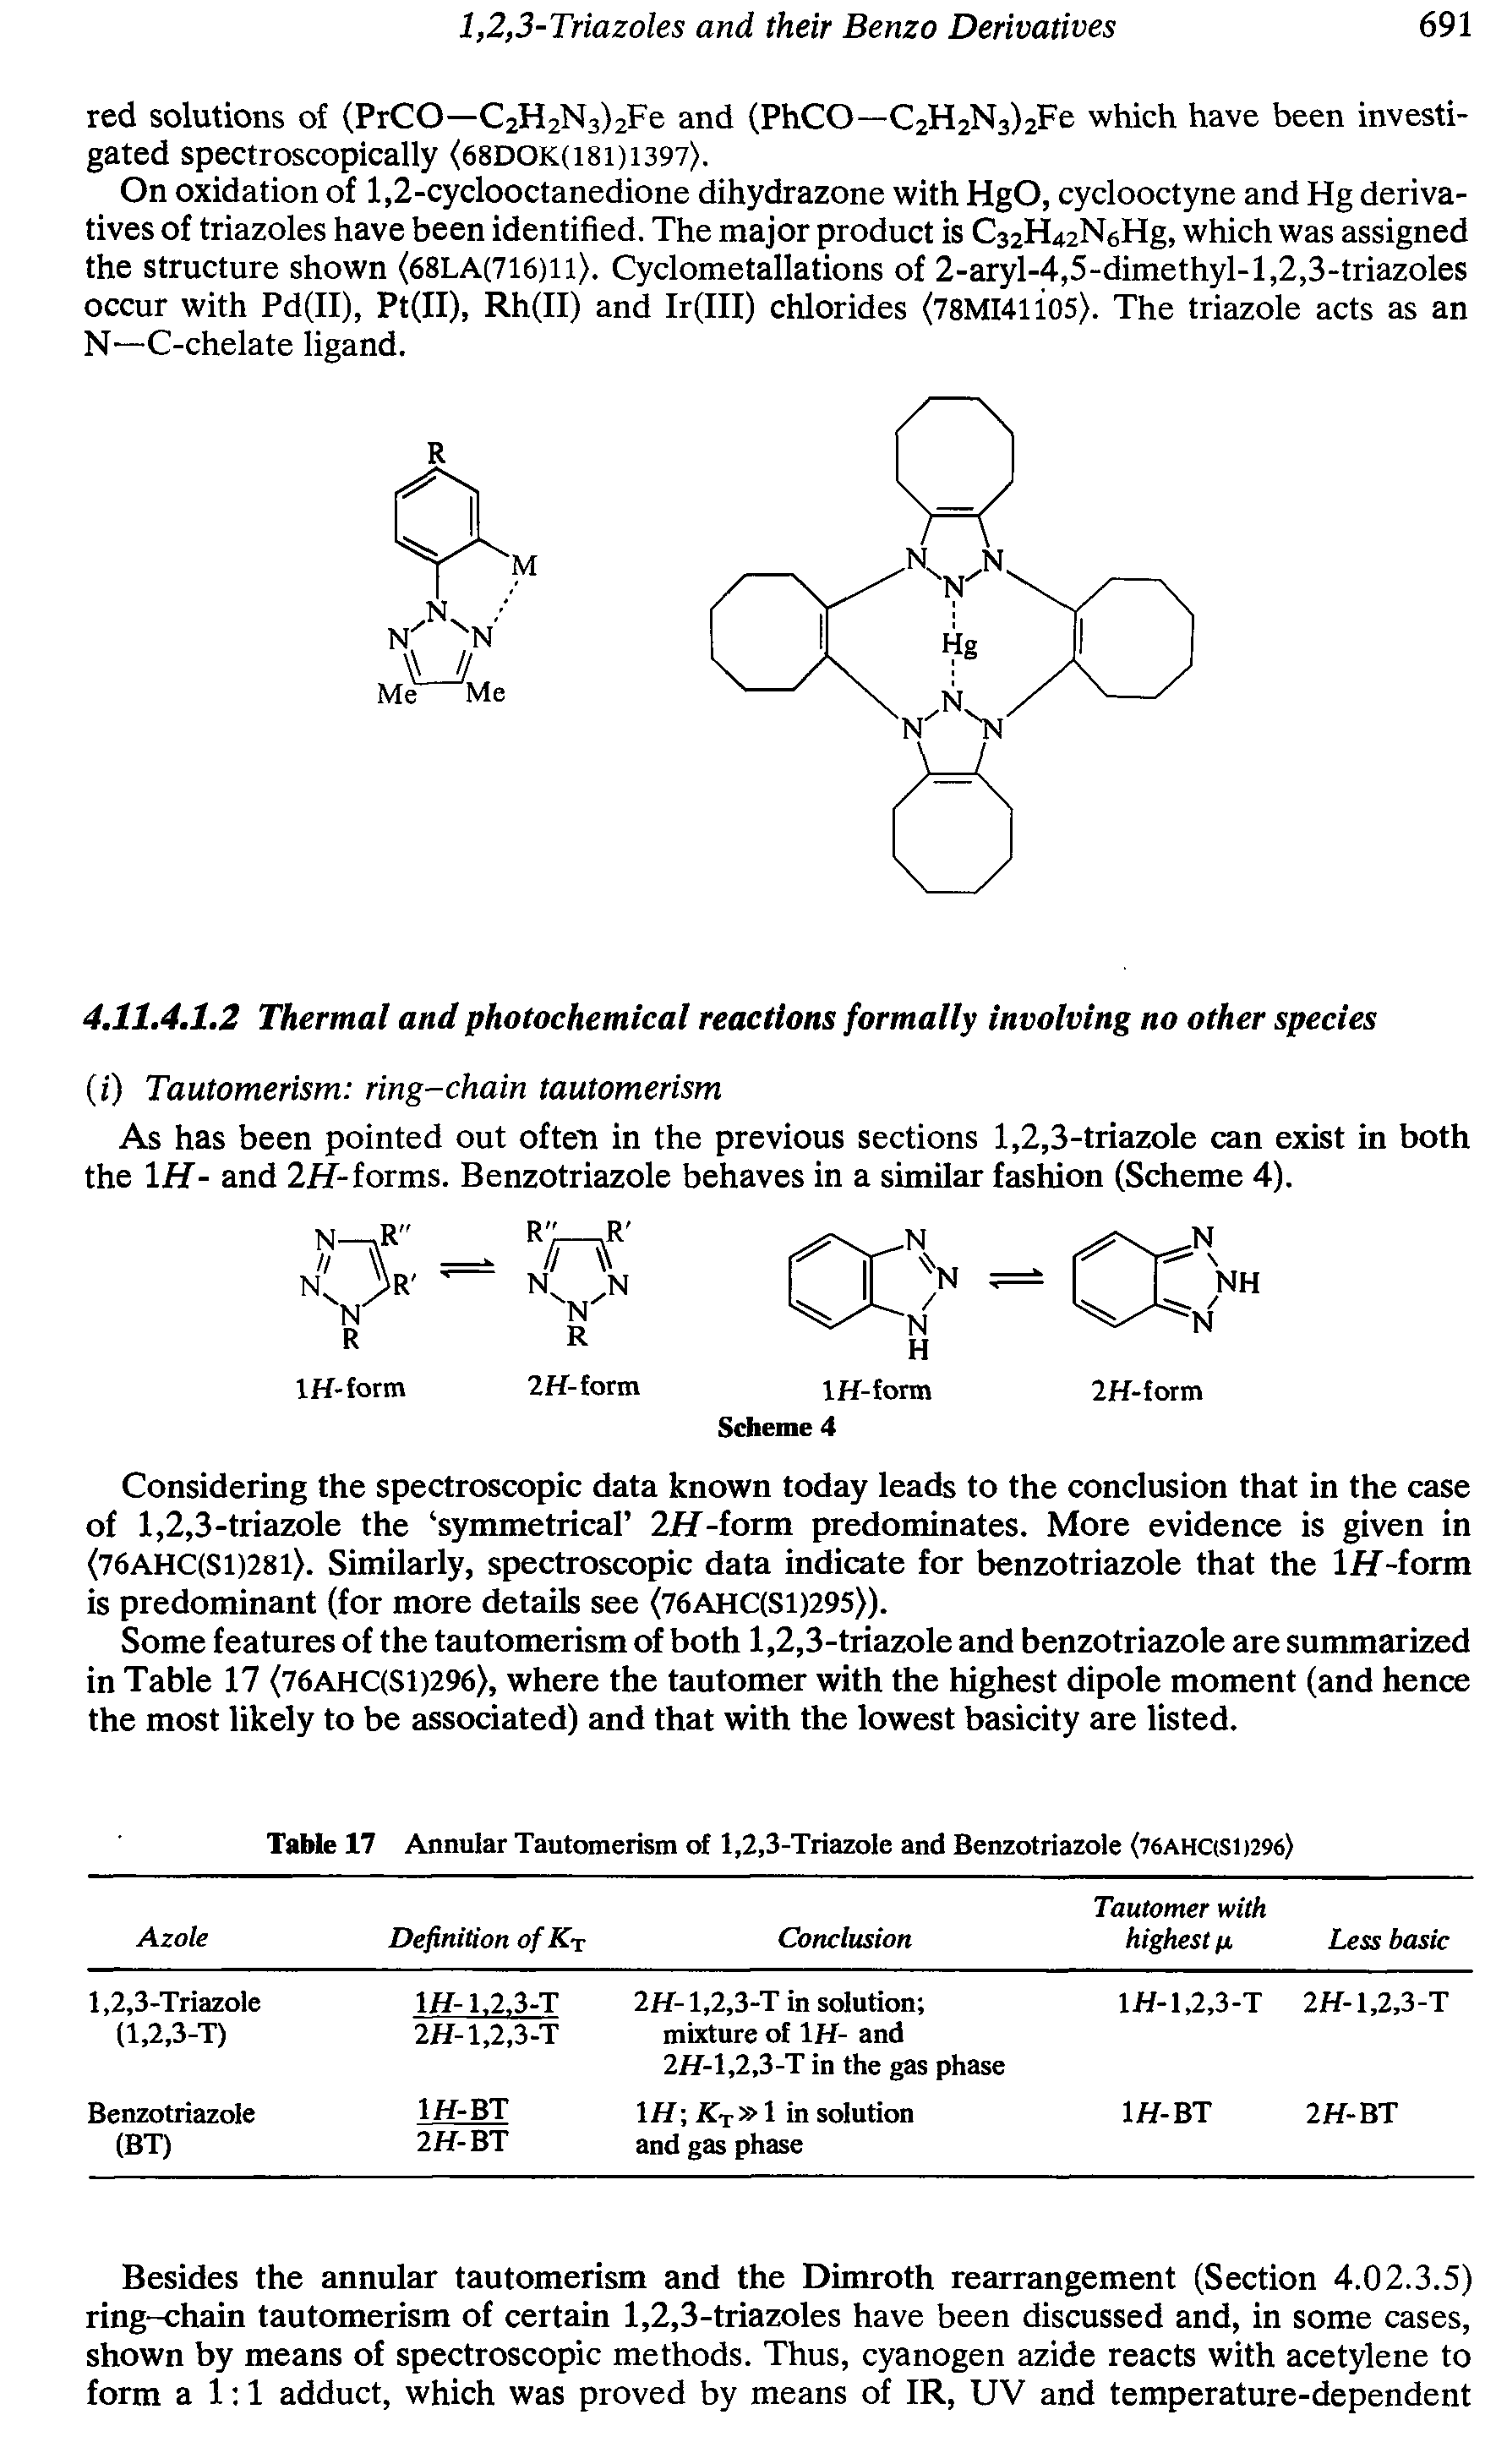 Table 17 Annular Tautomerism of 1,2,3-TriazoIe and Benzotriazole (76AHC(S1)296)...